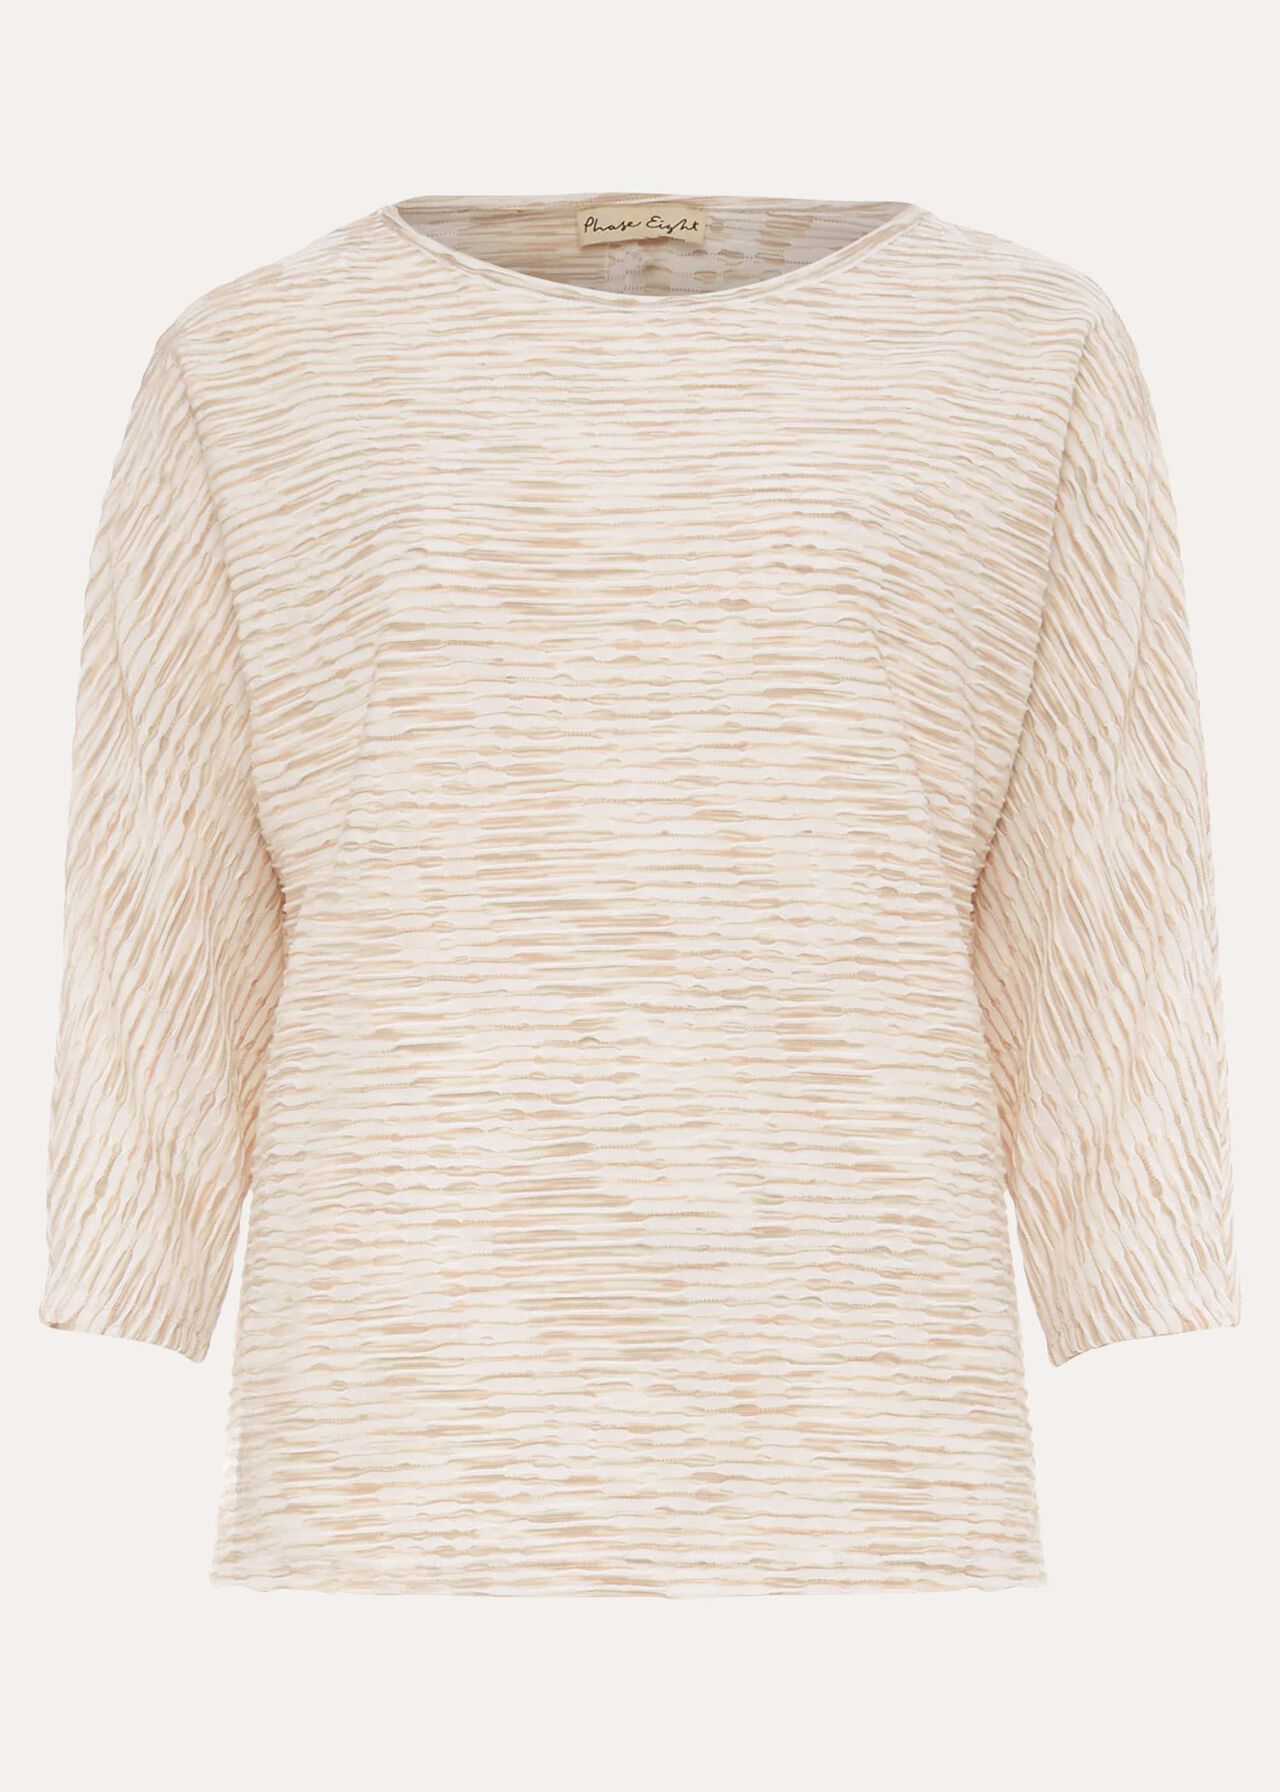 Agne Textured Wave Top